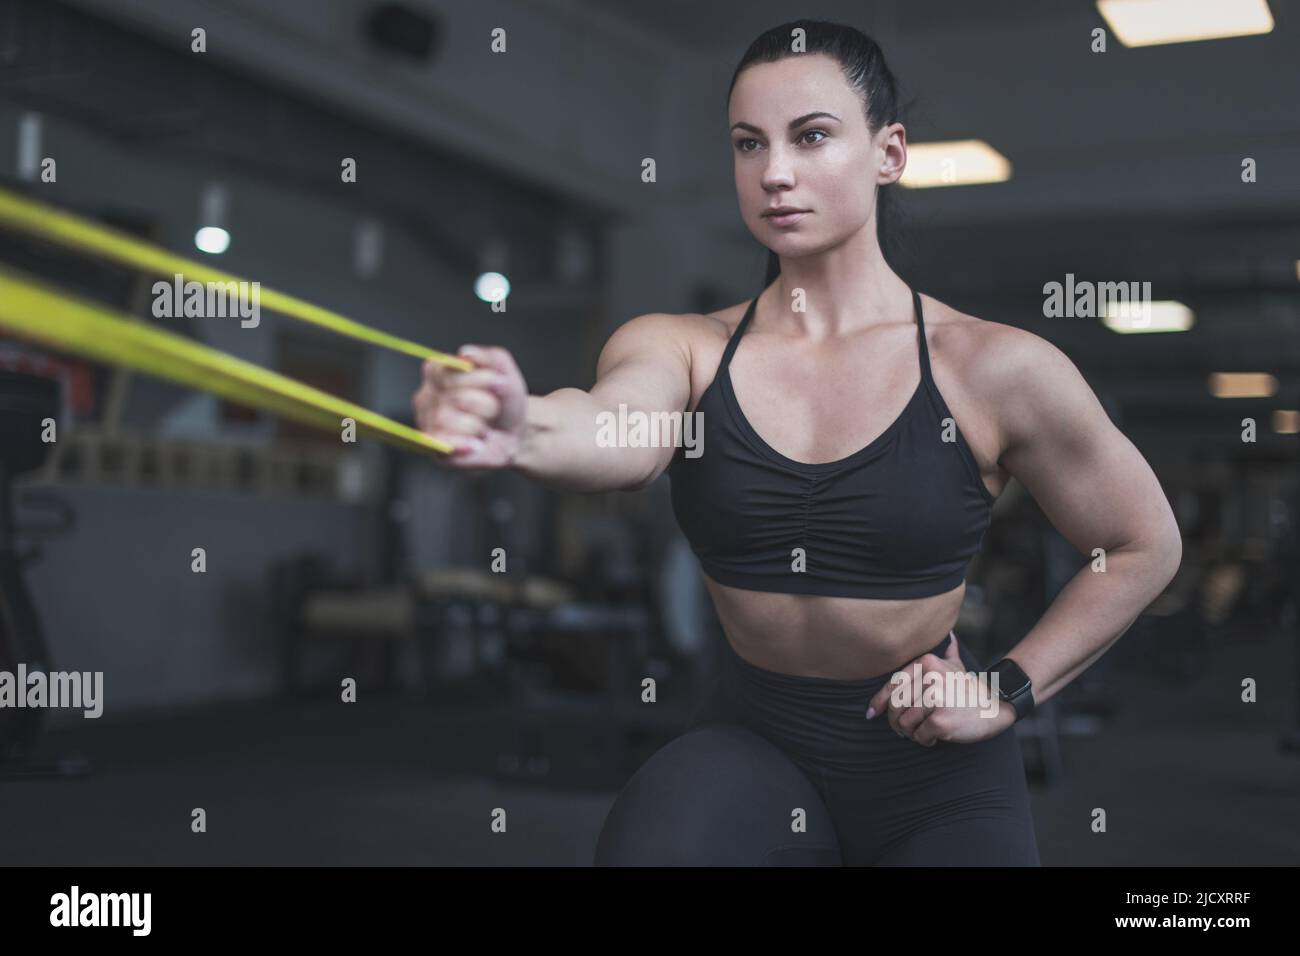 Muscular young woman warming-up with yellow rubber band in gym Stock Photo